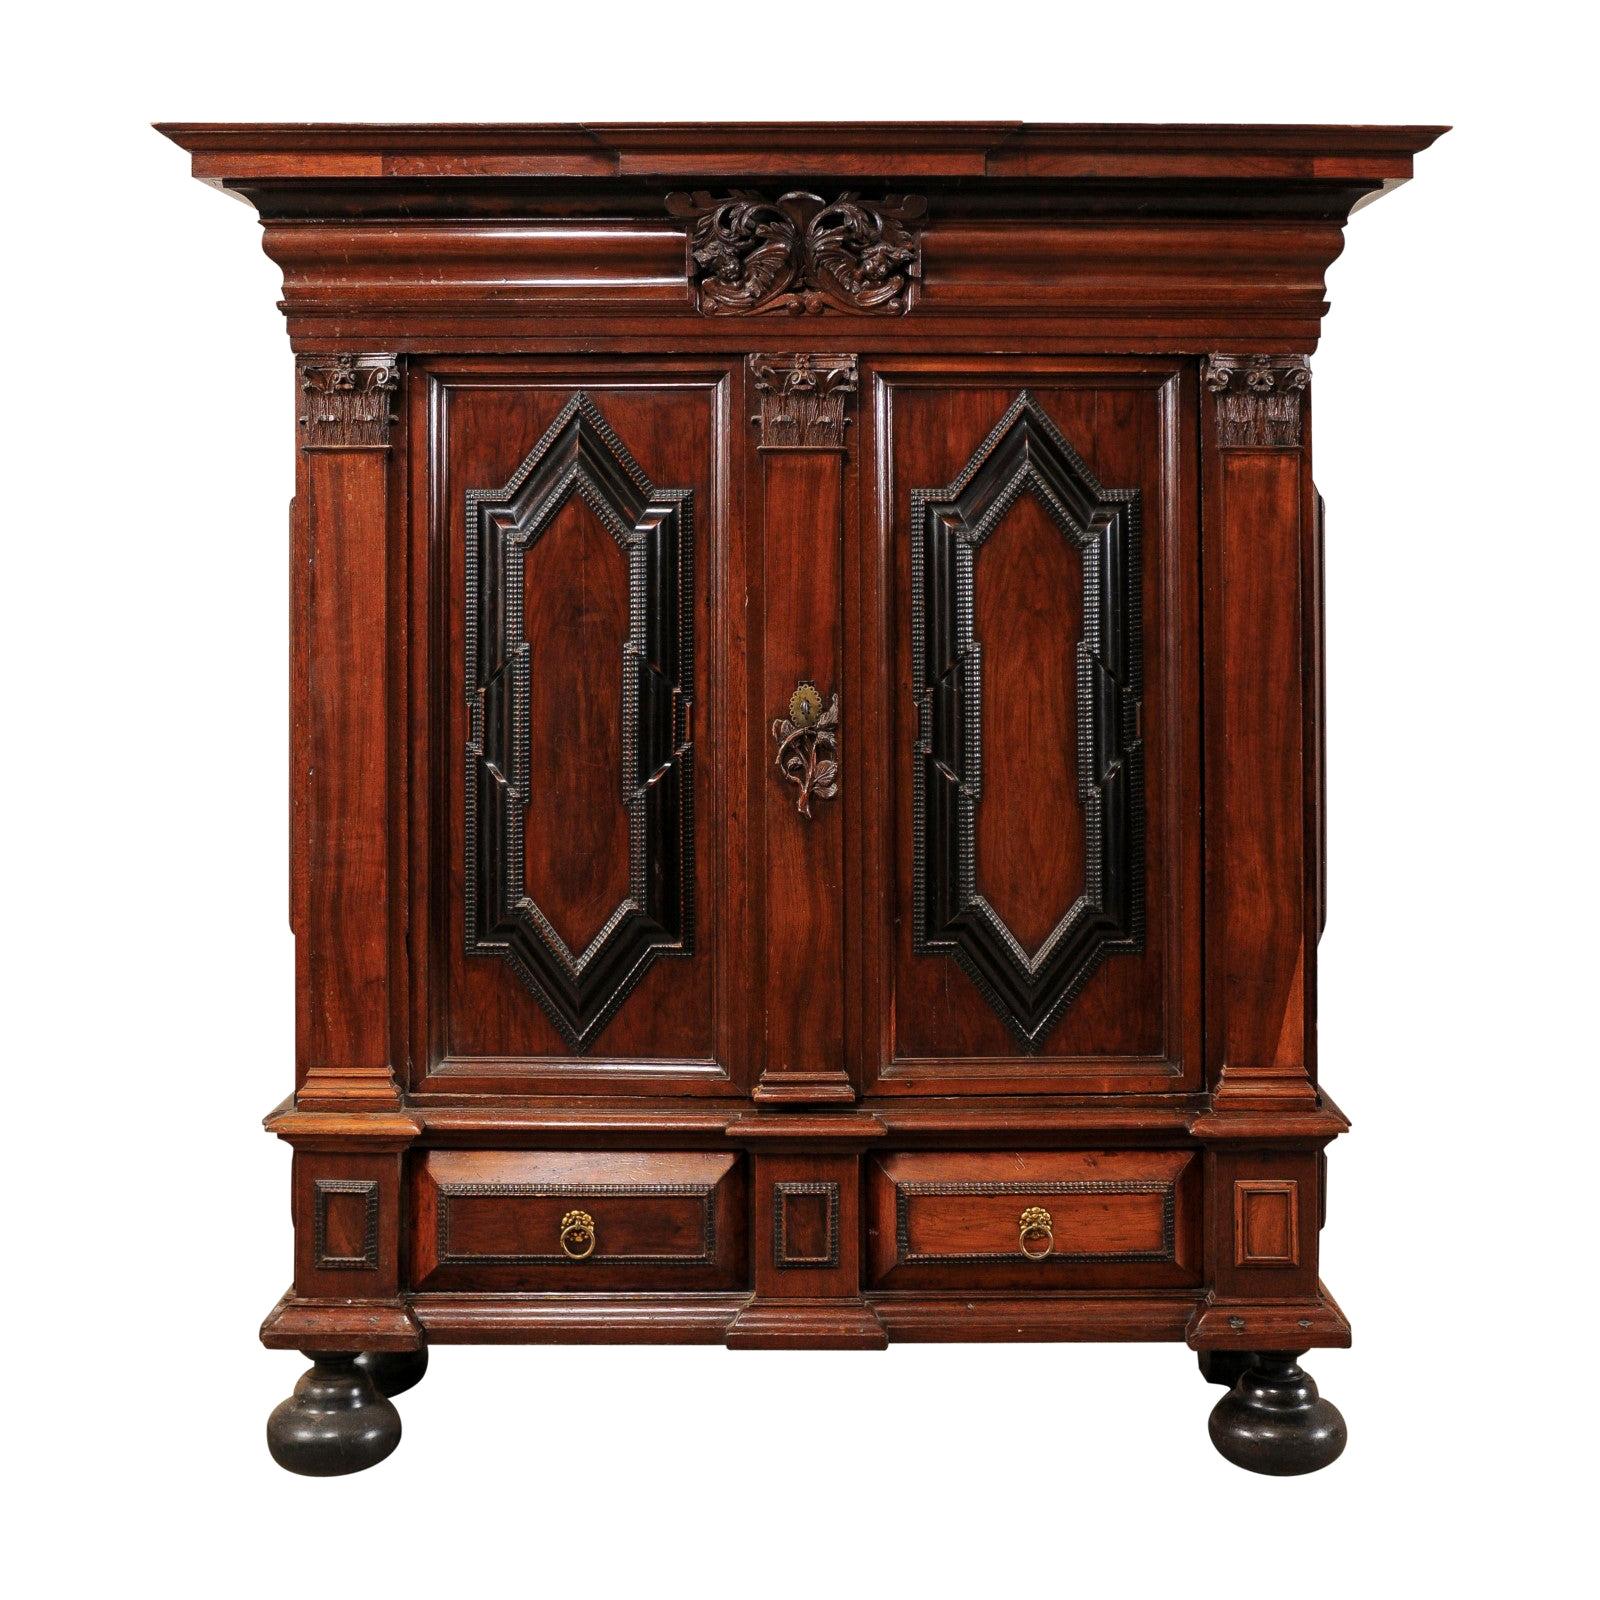 An Early 18th Century Swedish Period Baroque Kas Cabinet with Ebonized Accents For Sale